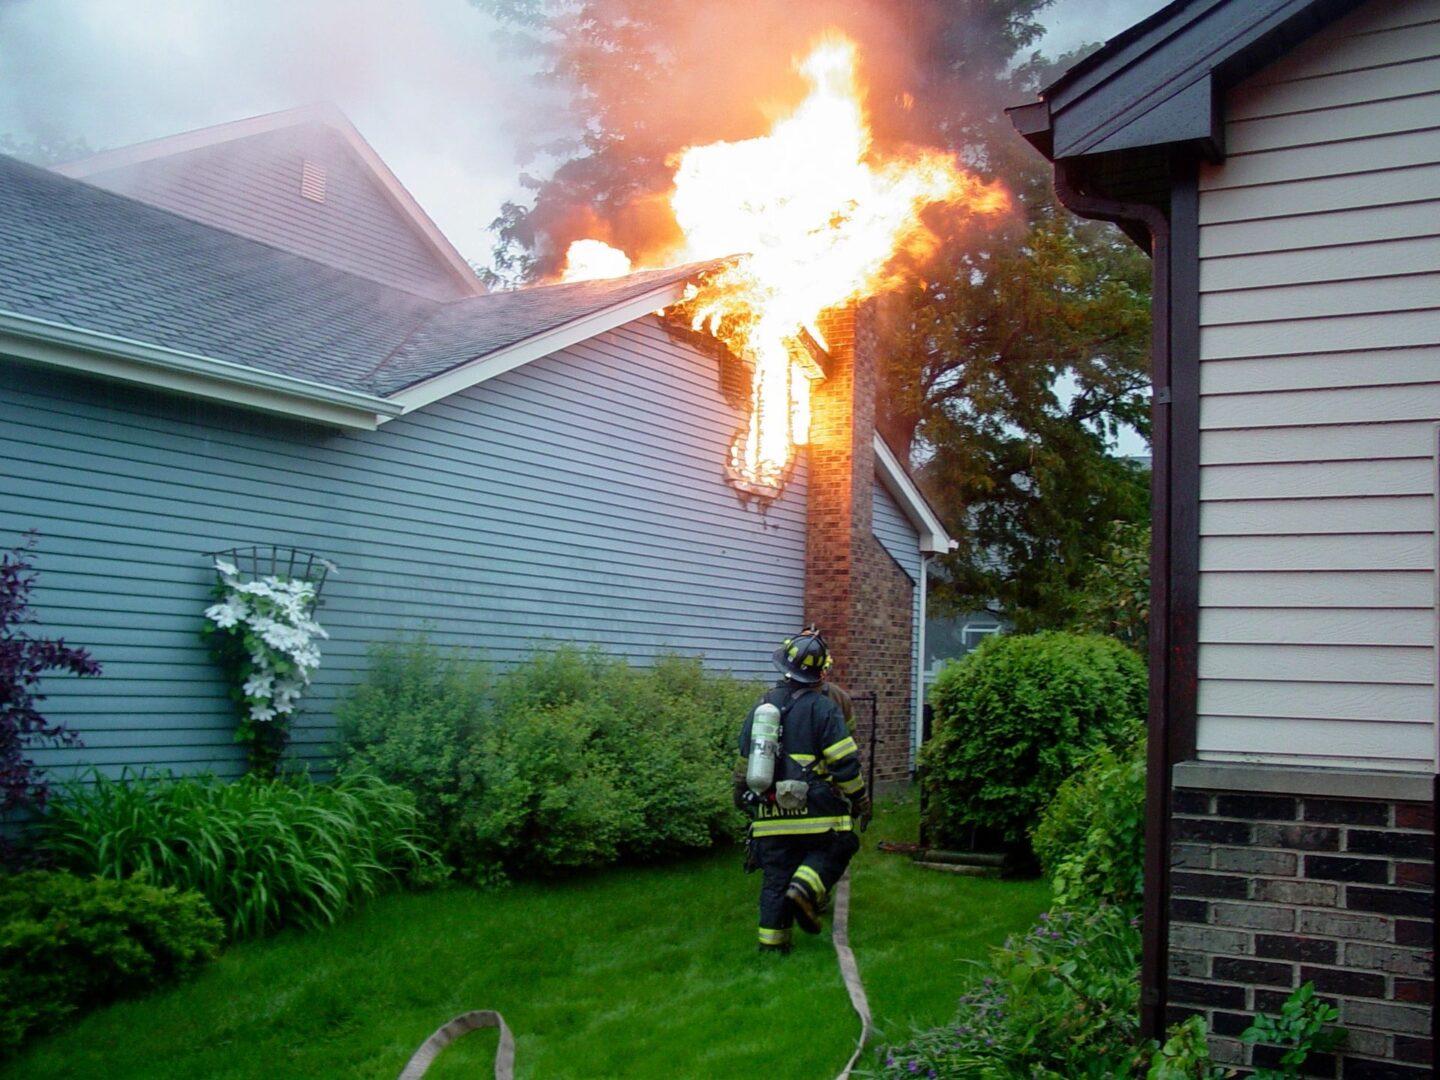 A fireman is in the yard of a house